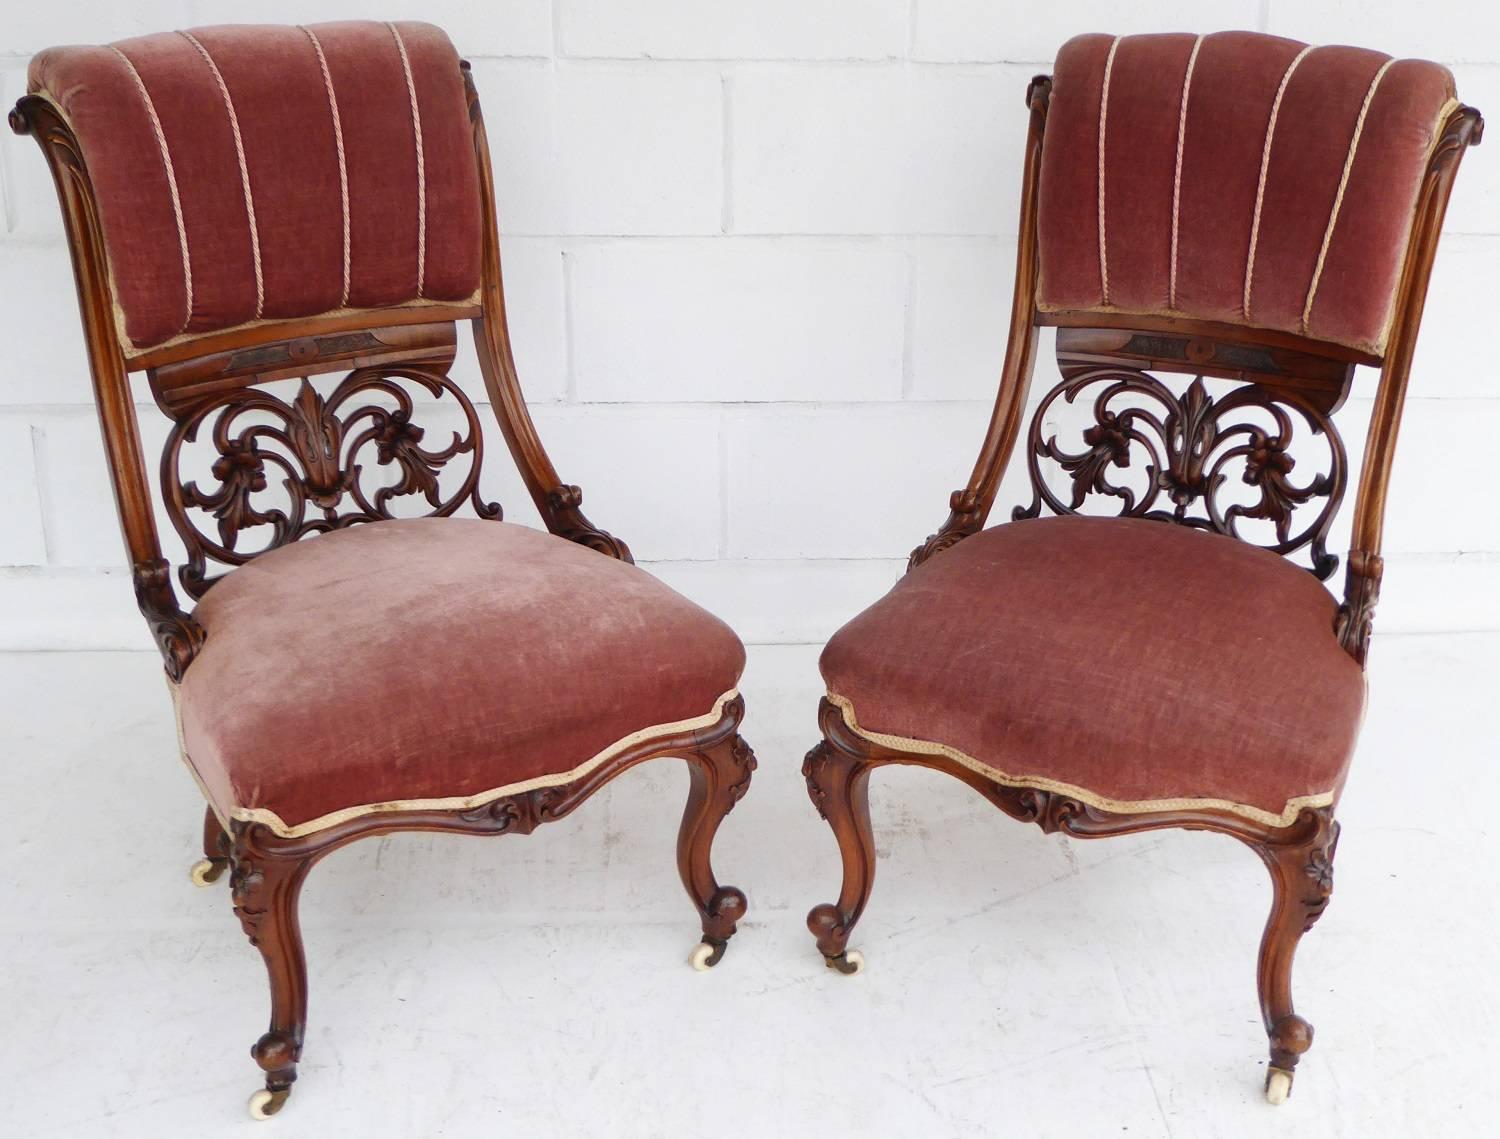 For sale is a good quality Set of 12 Victorian Walnut Dining Chairs with two matching salon chairs. Each chair has an ornate back and stands on cabriole legs and is in good condition. All 14 chairs are in good condition being structurally sound, the